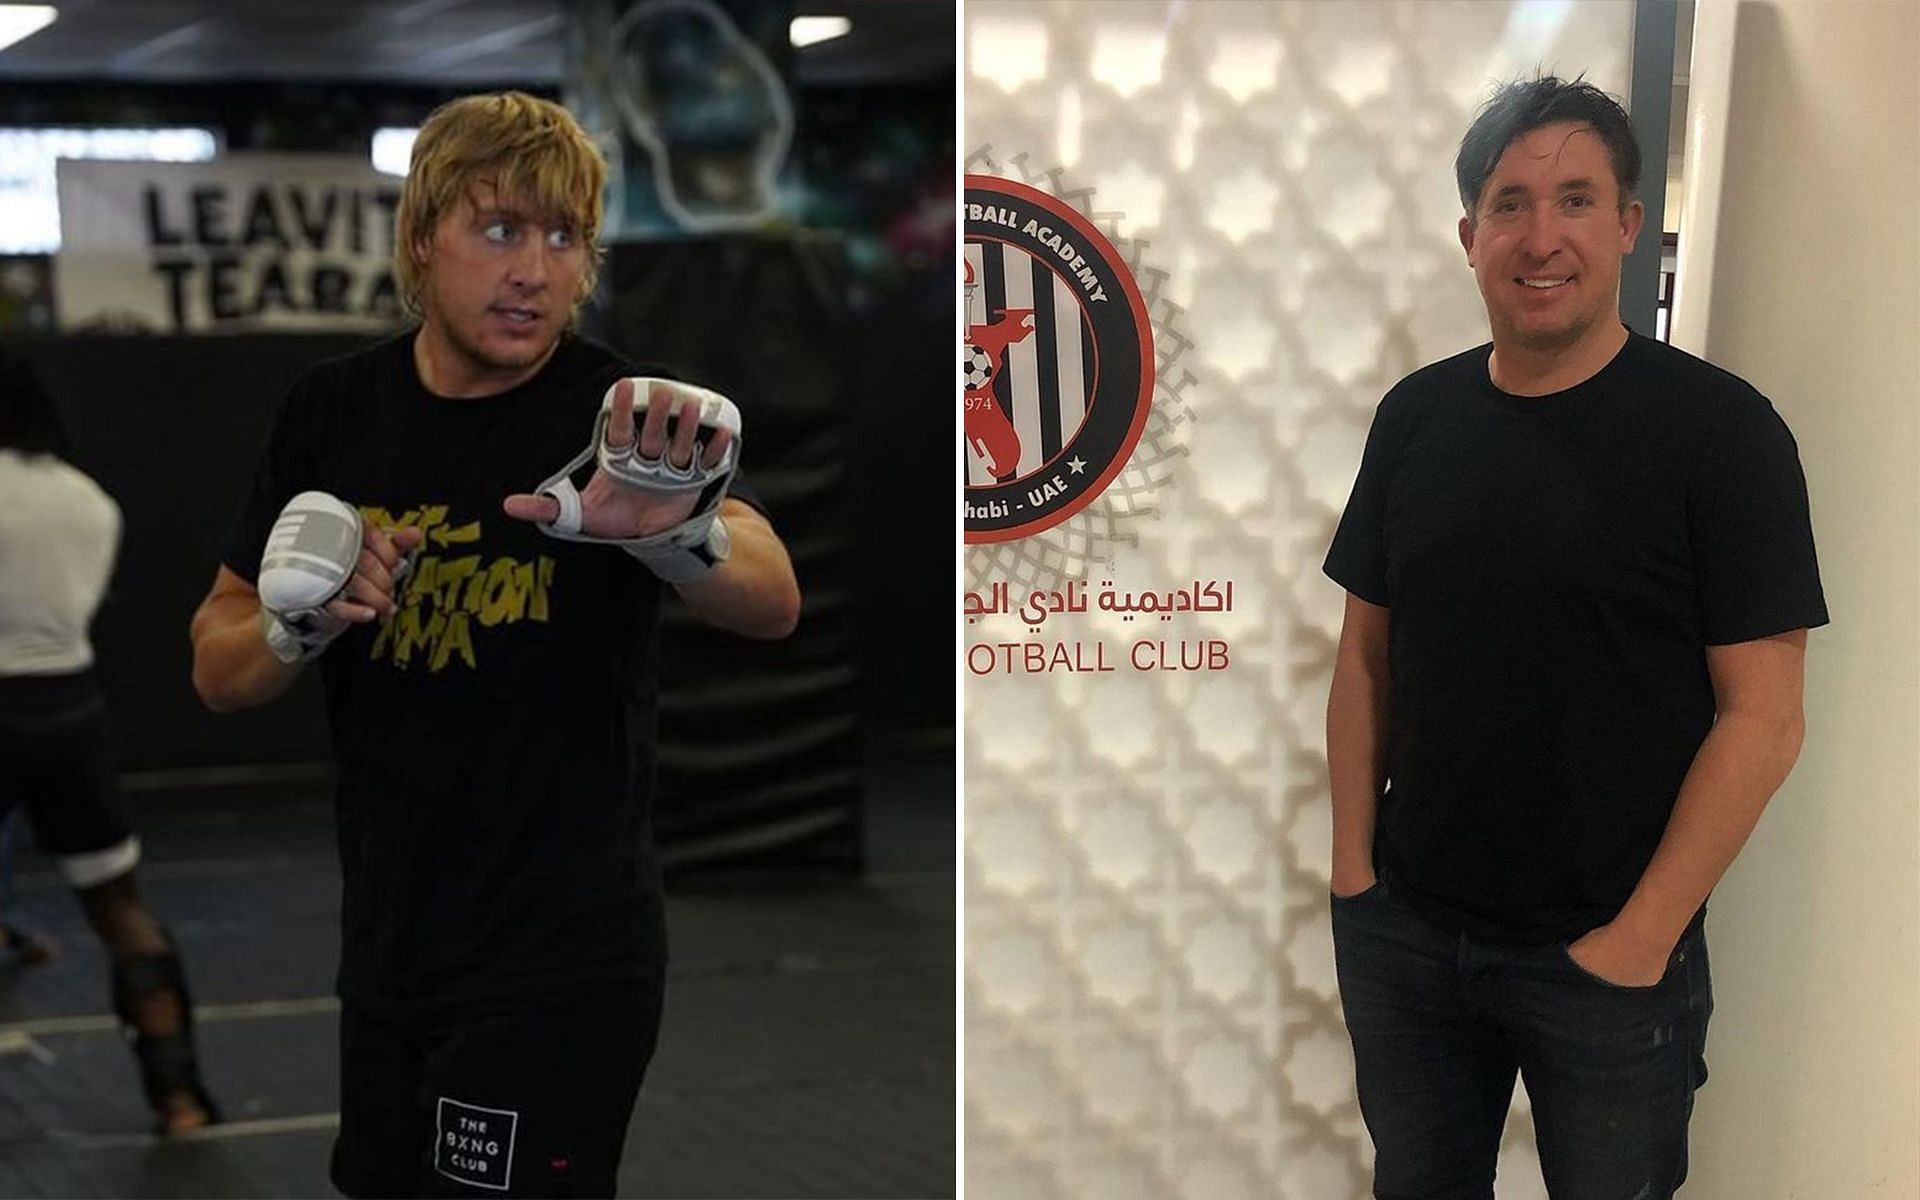 Paddy Pimblett (L) and Robbie Fowler (R) Images via @theufcbaddy and @rob9fowler Instagram